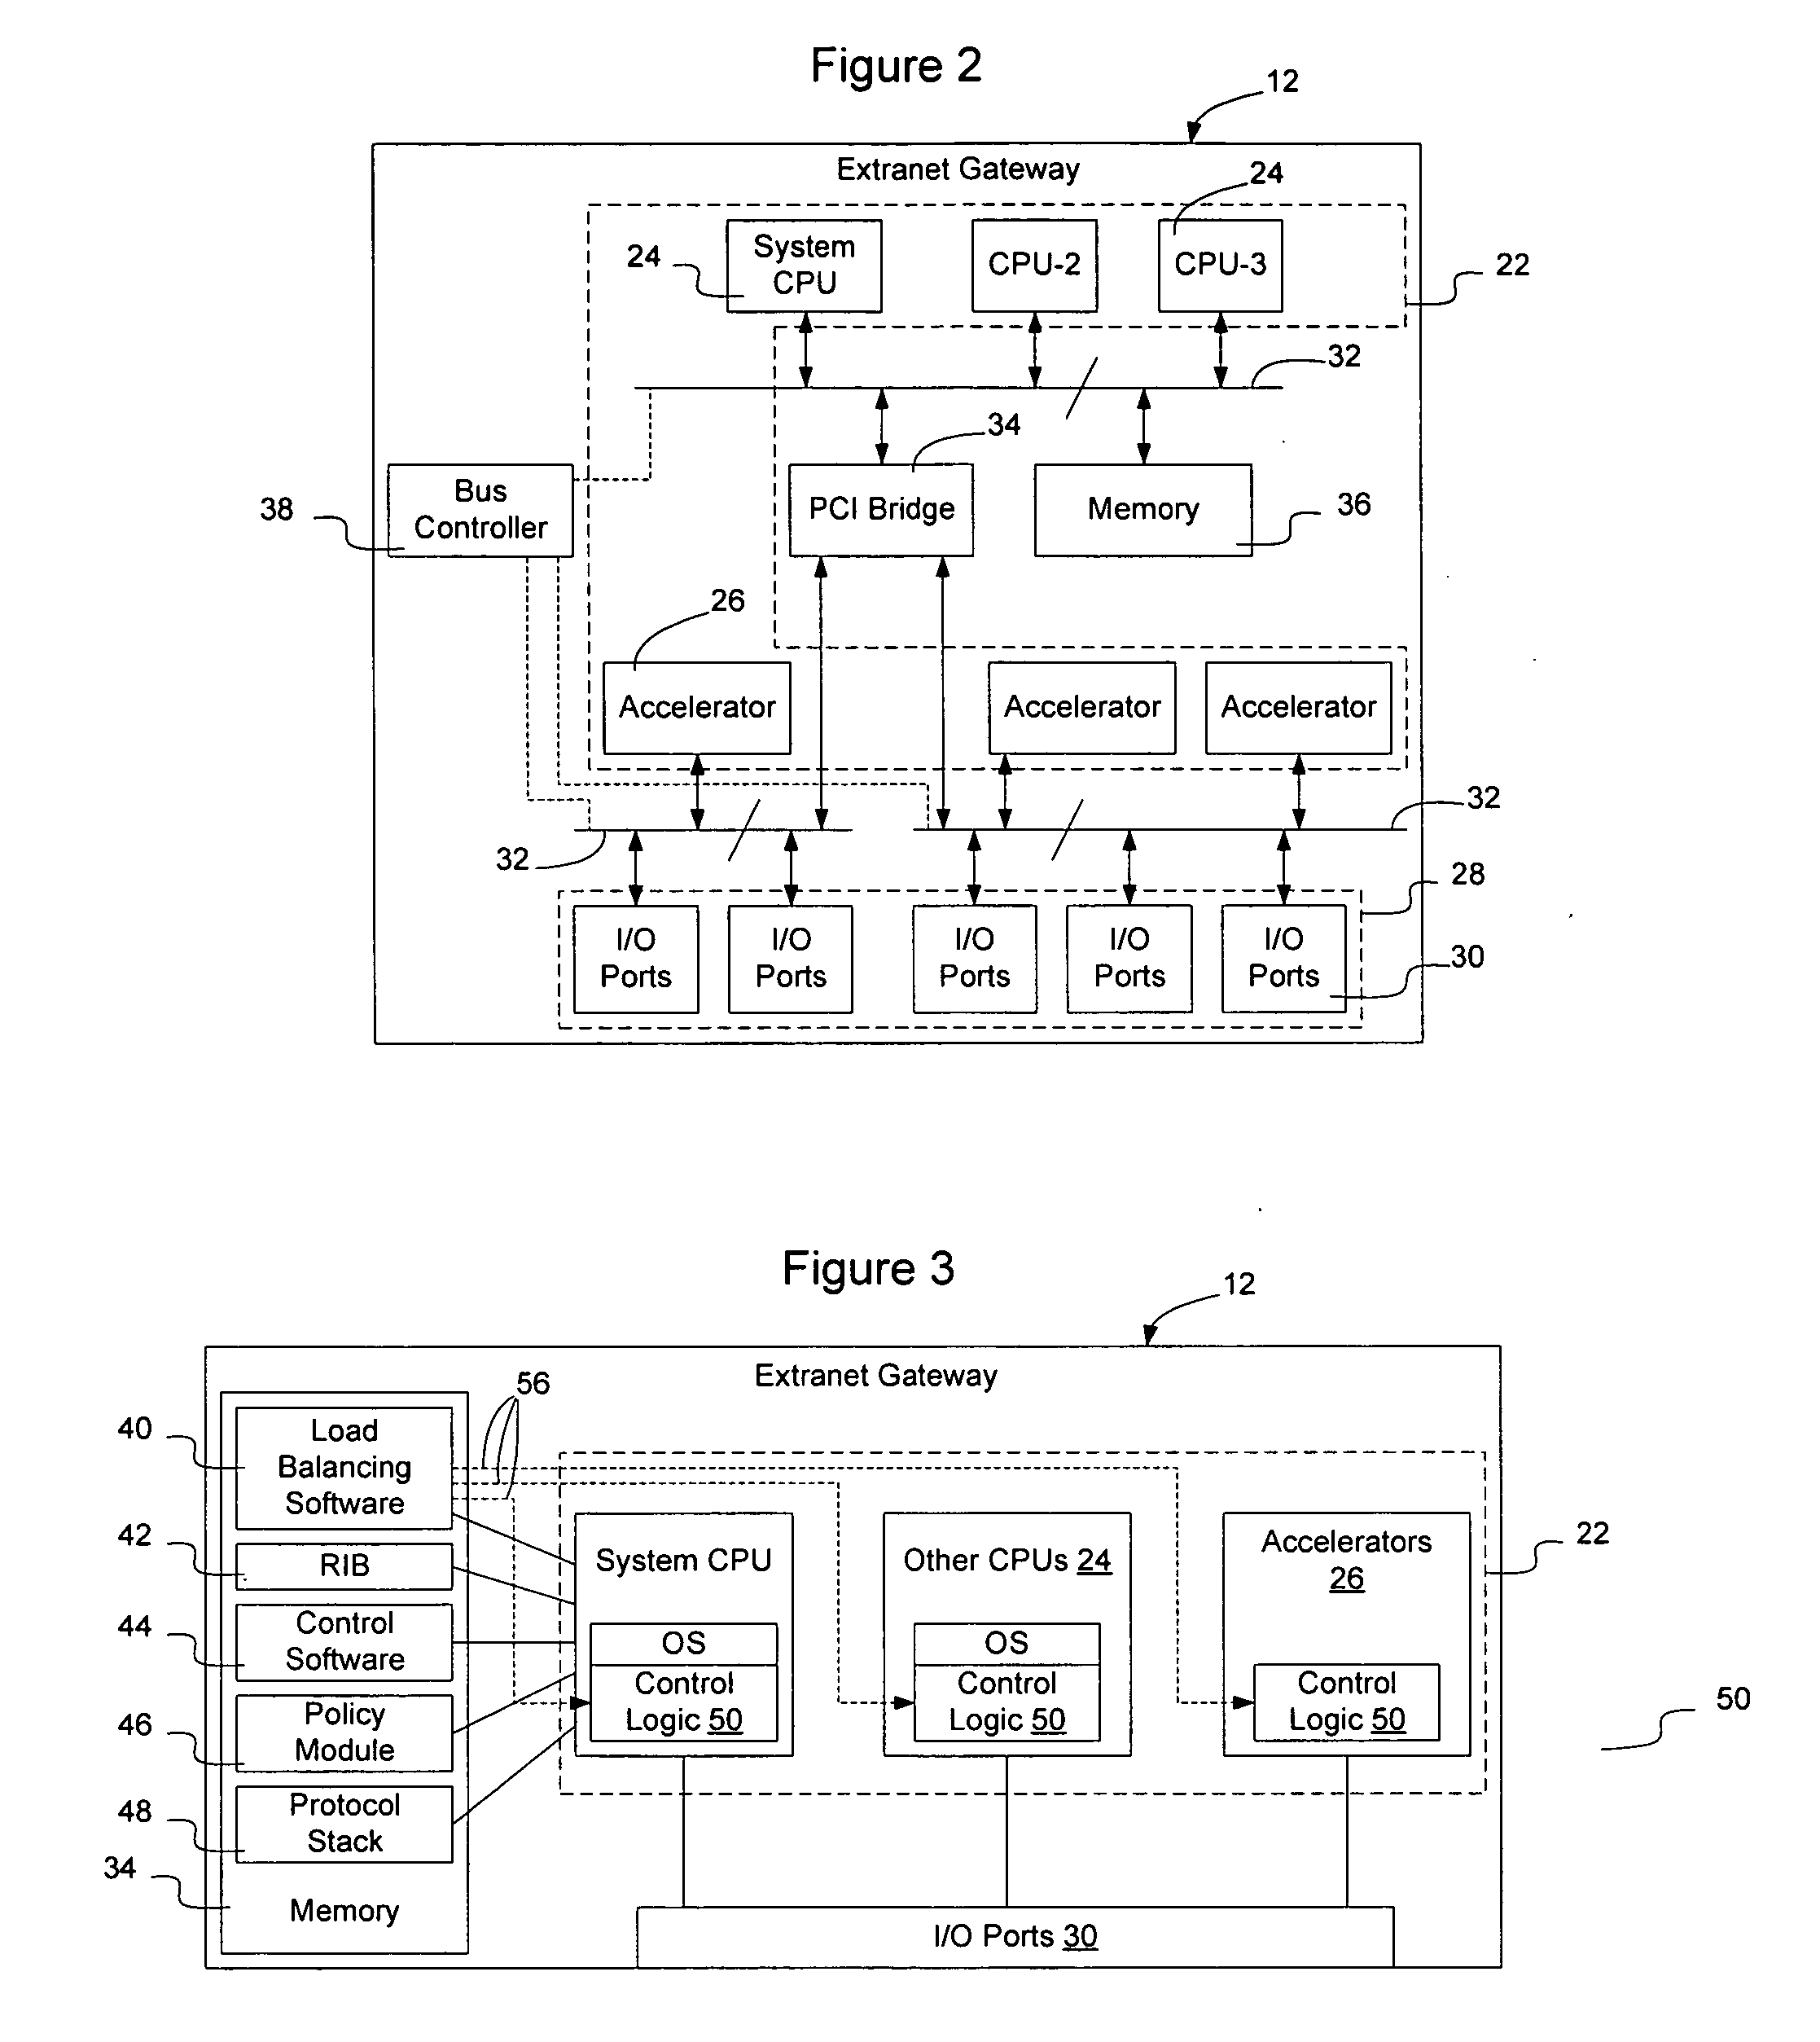 Method and apparatus for allocating processing capacity of system processing units in an extranet gateway